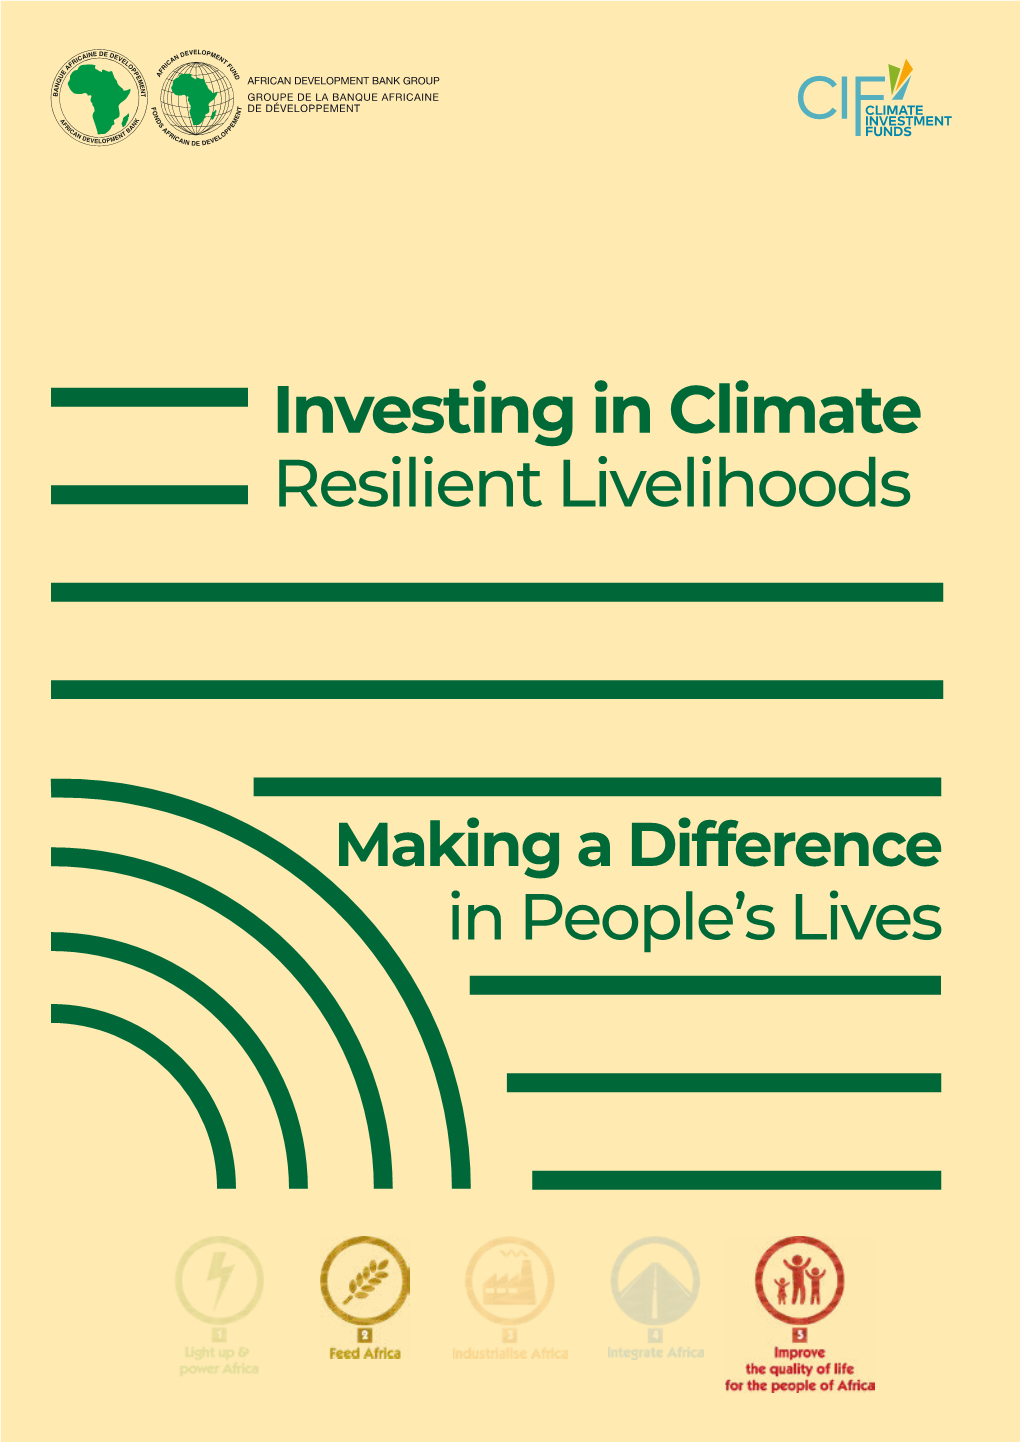 Investing in Climate Resilient Livelihoods